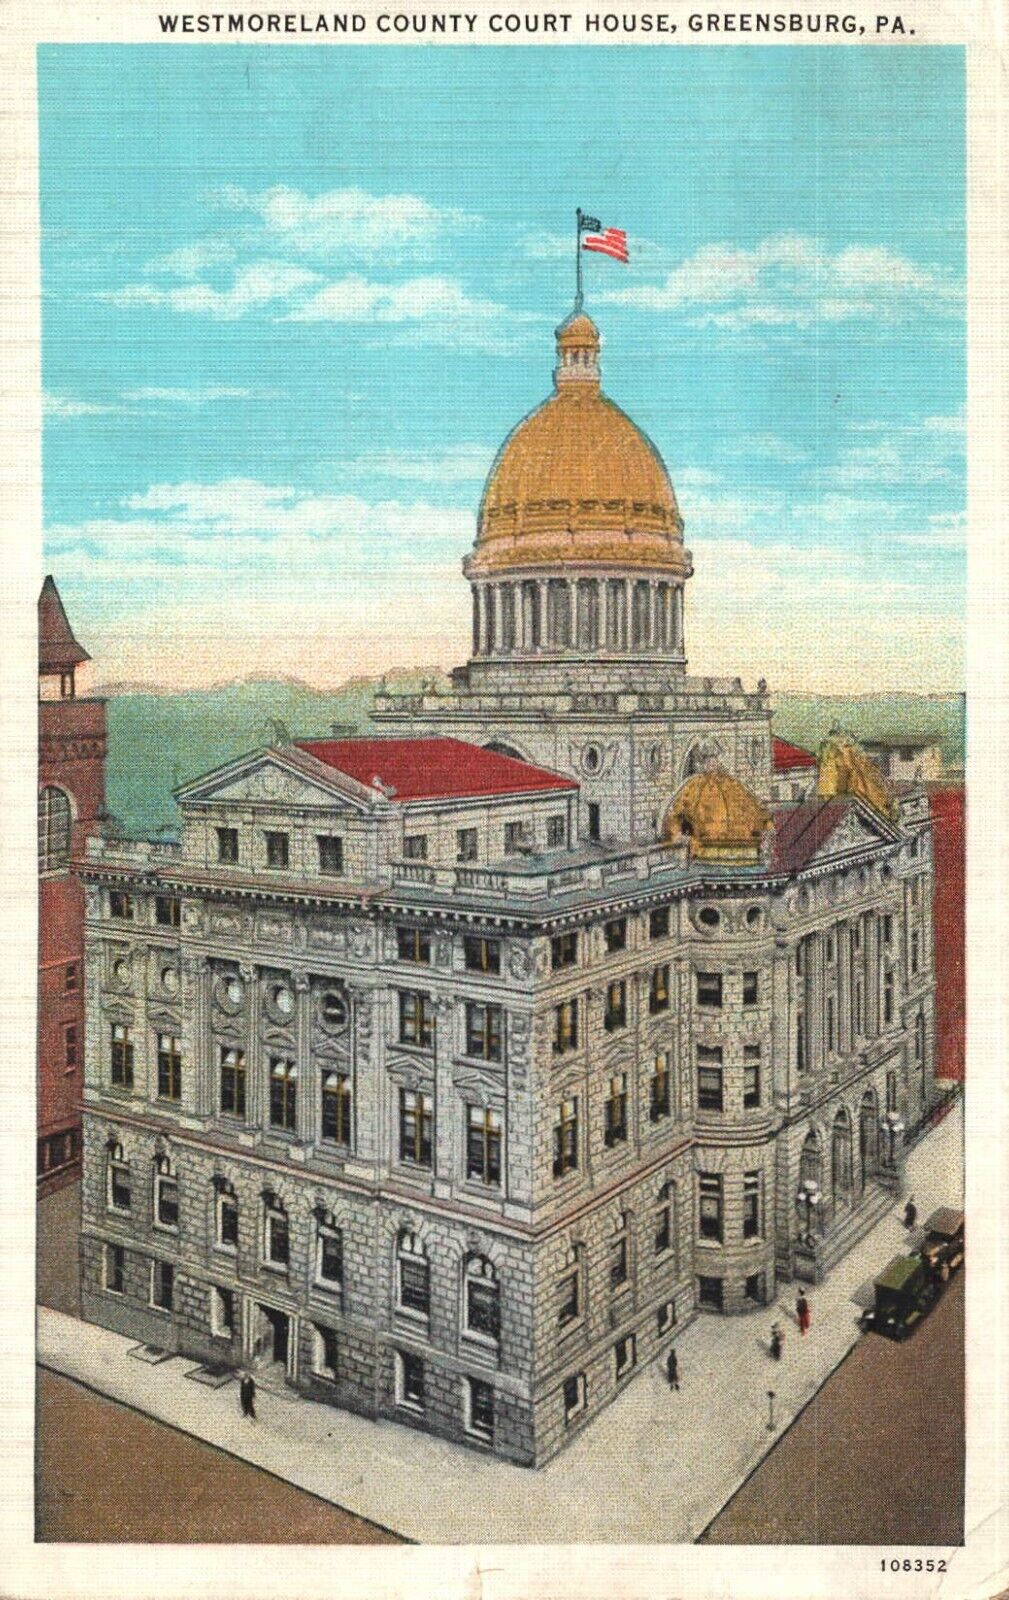 Westmoreland County Court House Greensburg PA Vintage 1936 Postcard